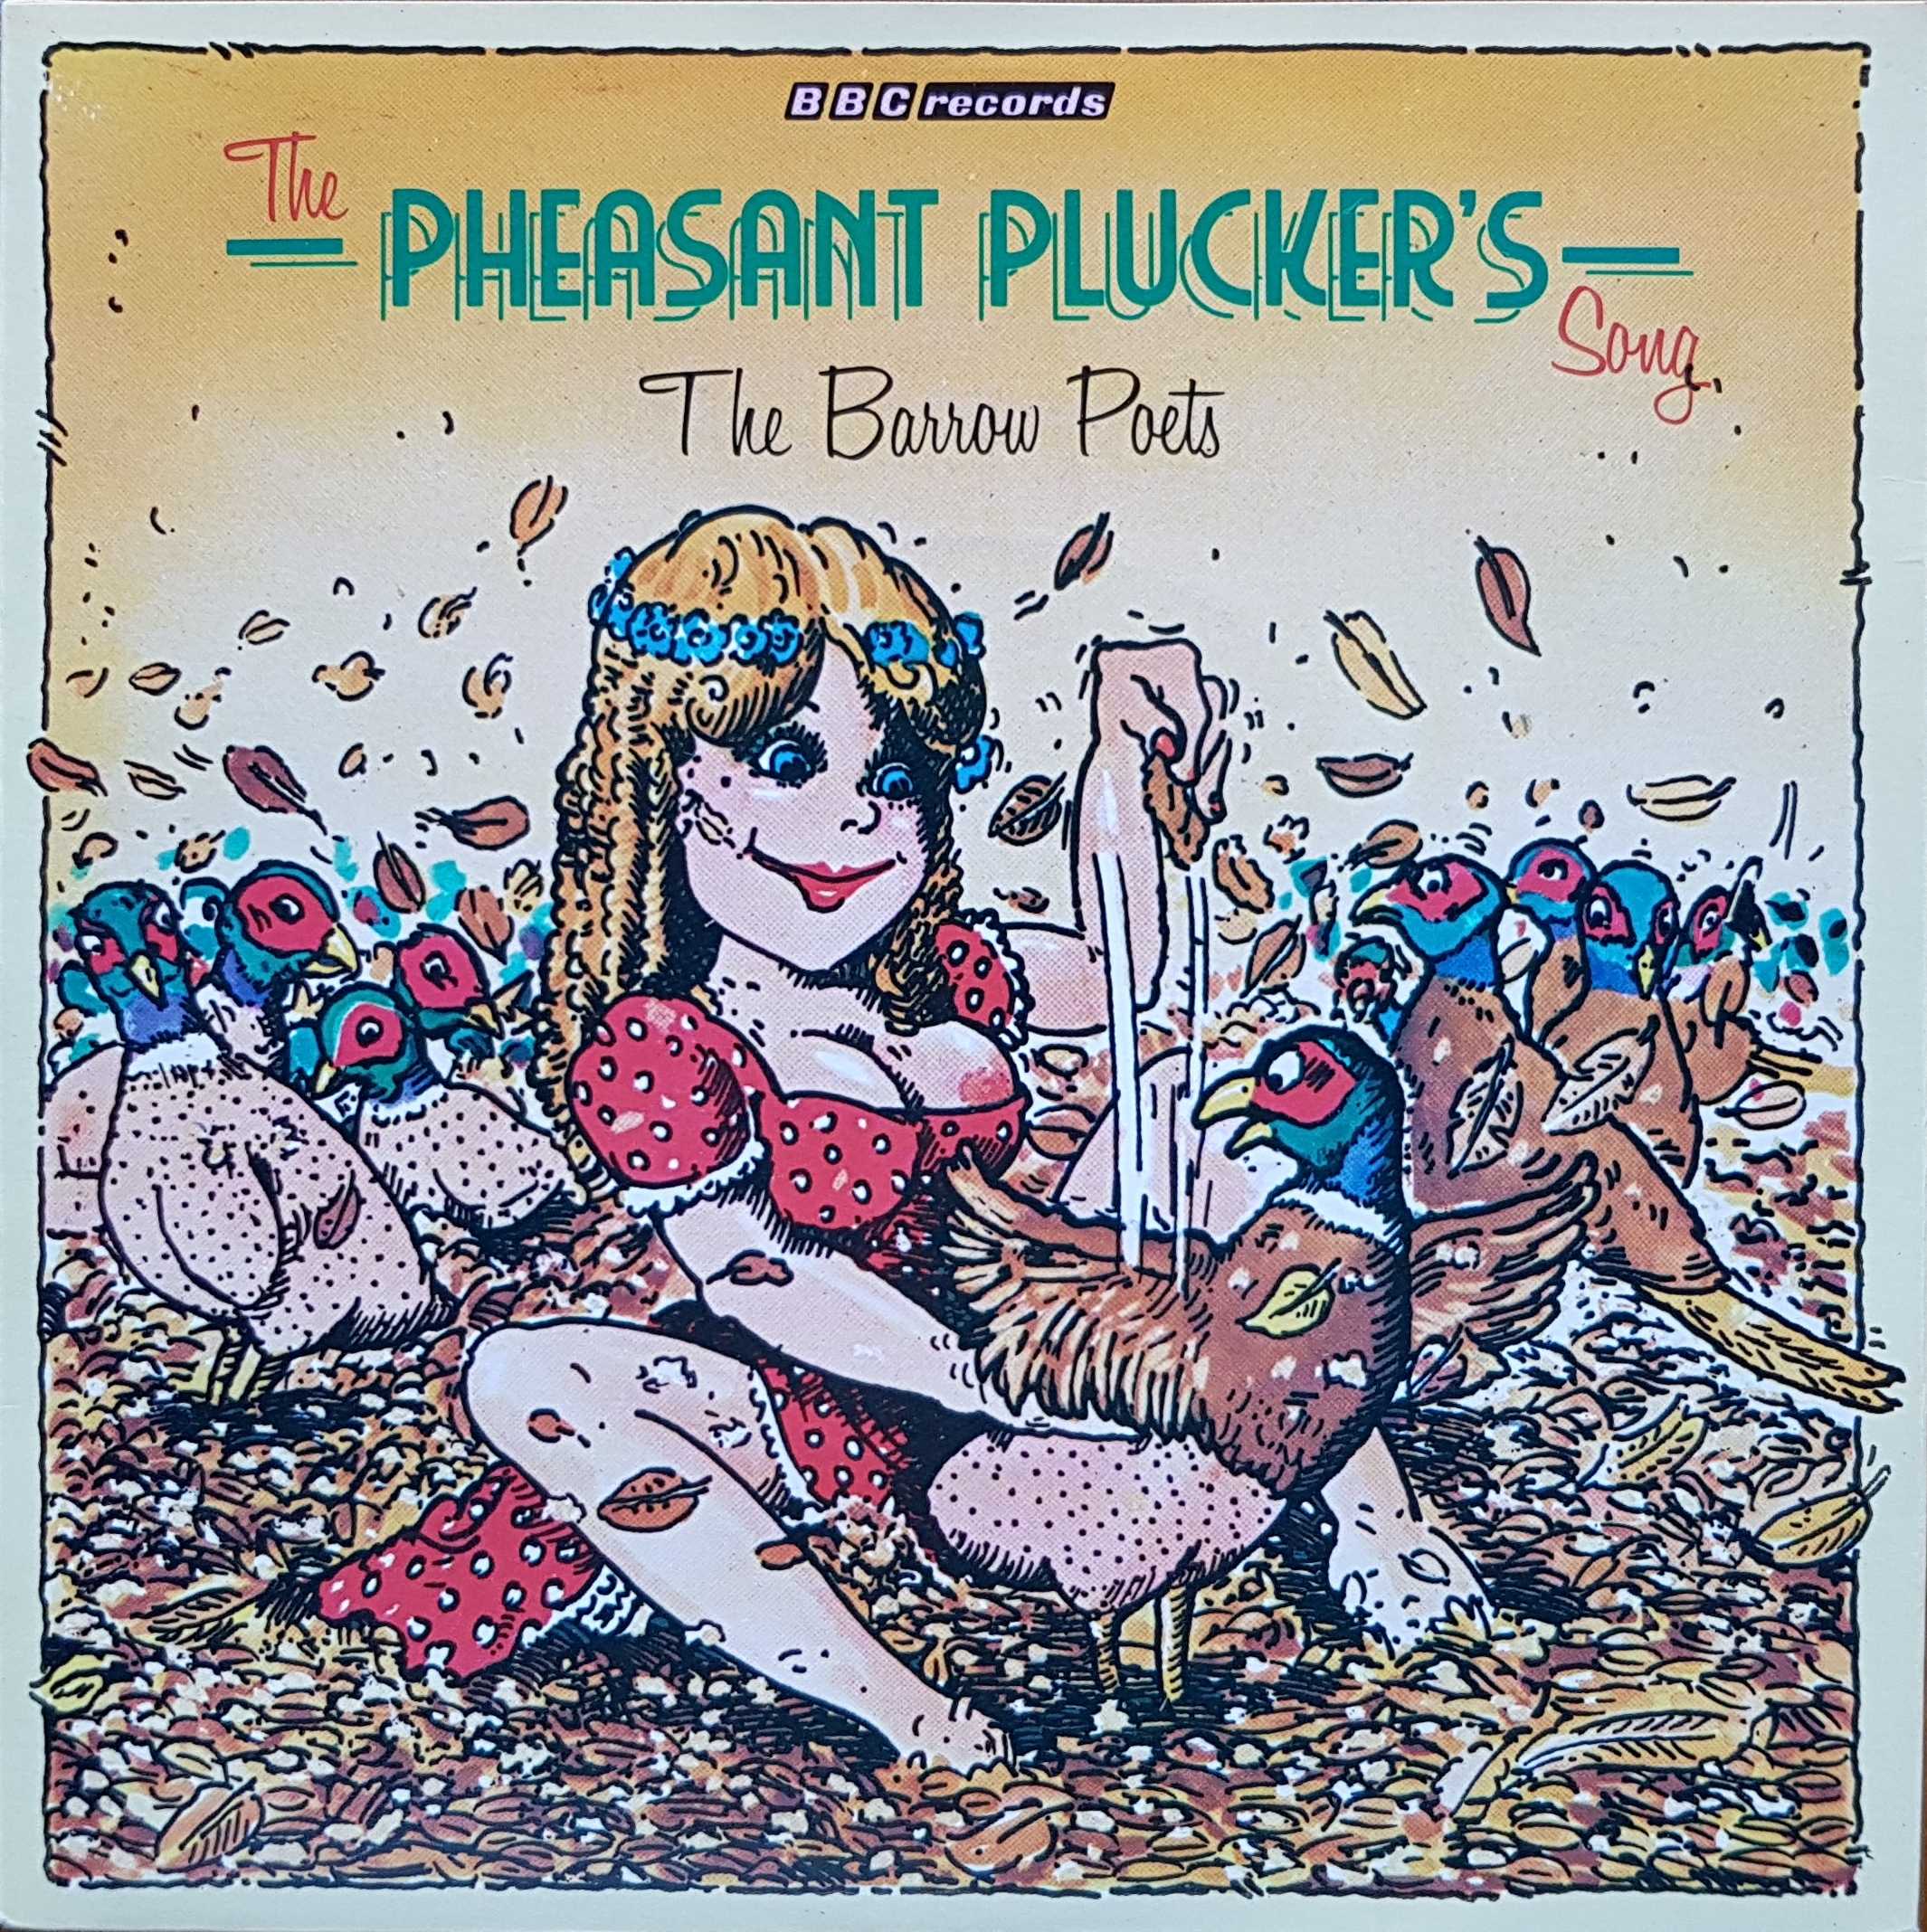 Picture of RESL 86 The pheasant plucker's song by artist The Barrow Poets from the BBC singles - Records and Tapes library